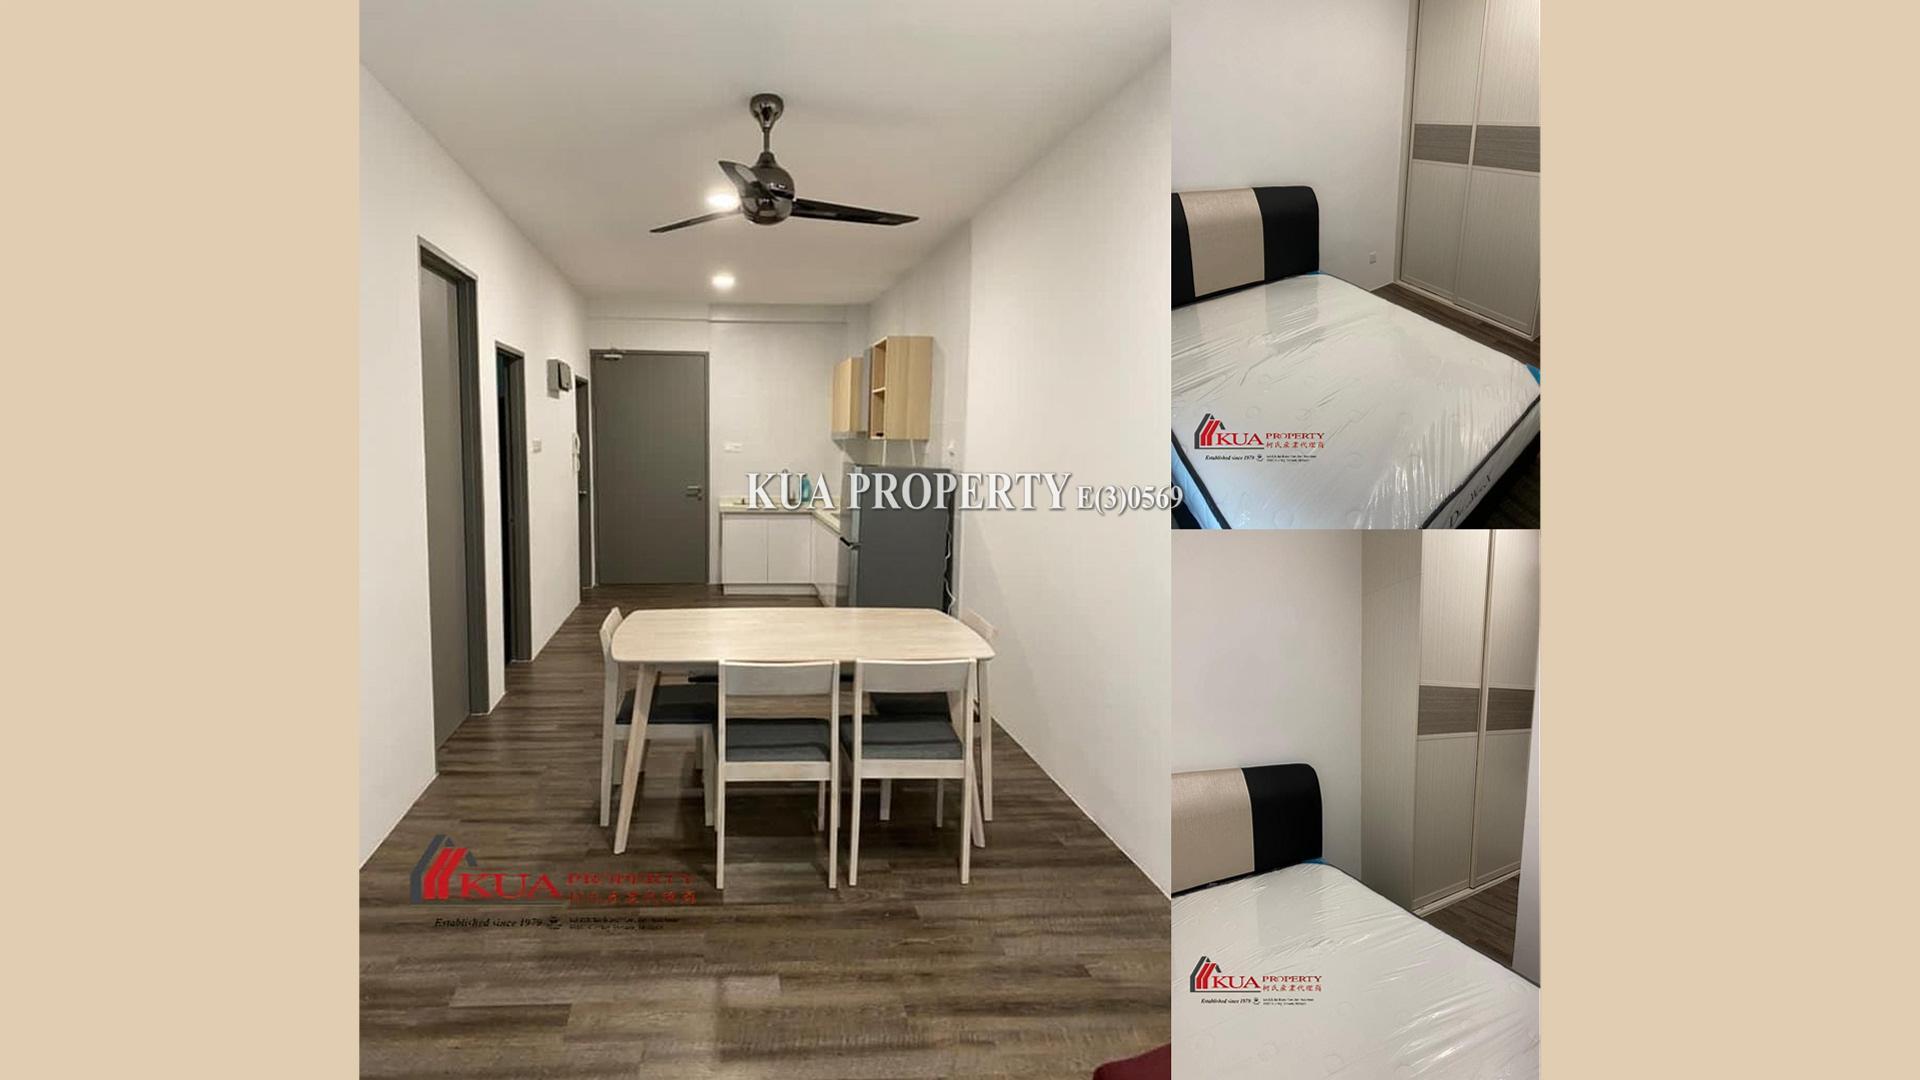 📍HK Square Unit FOR SALE! at Stapok, Kuching